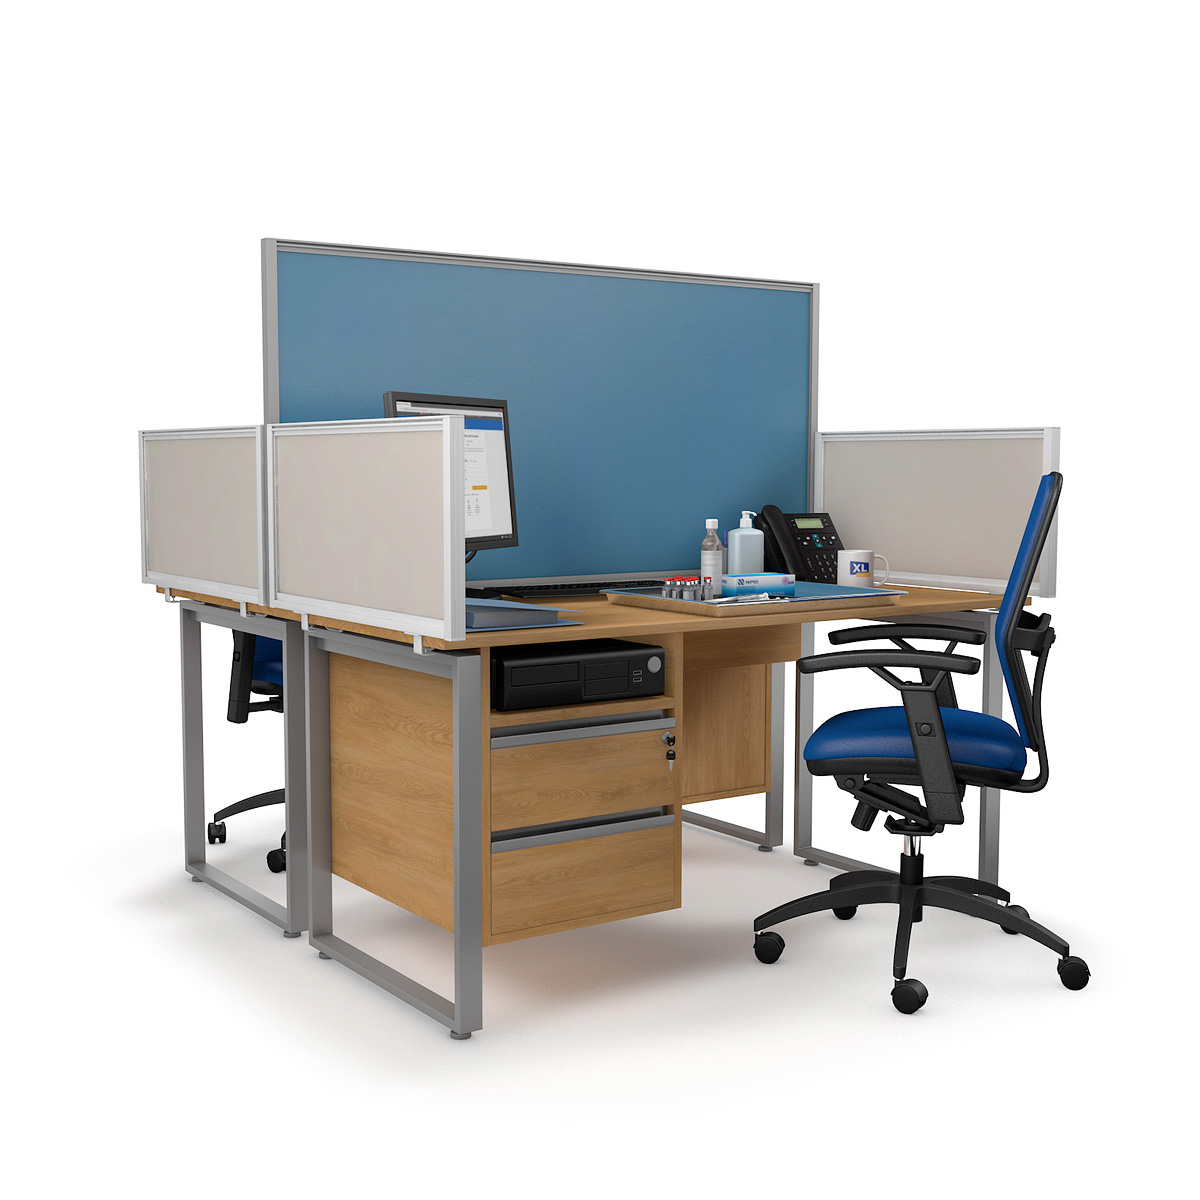 FRONTIER® Medical Screens Anti Microbial Desk Screen Dividers With 800mm High